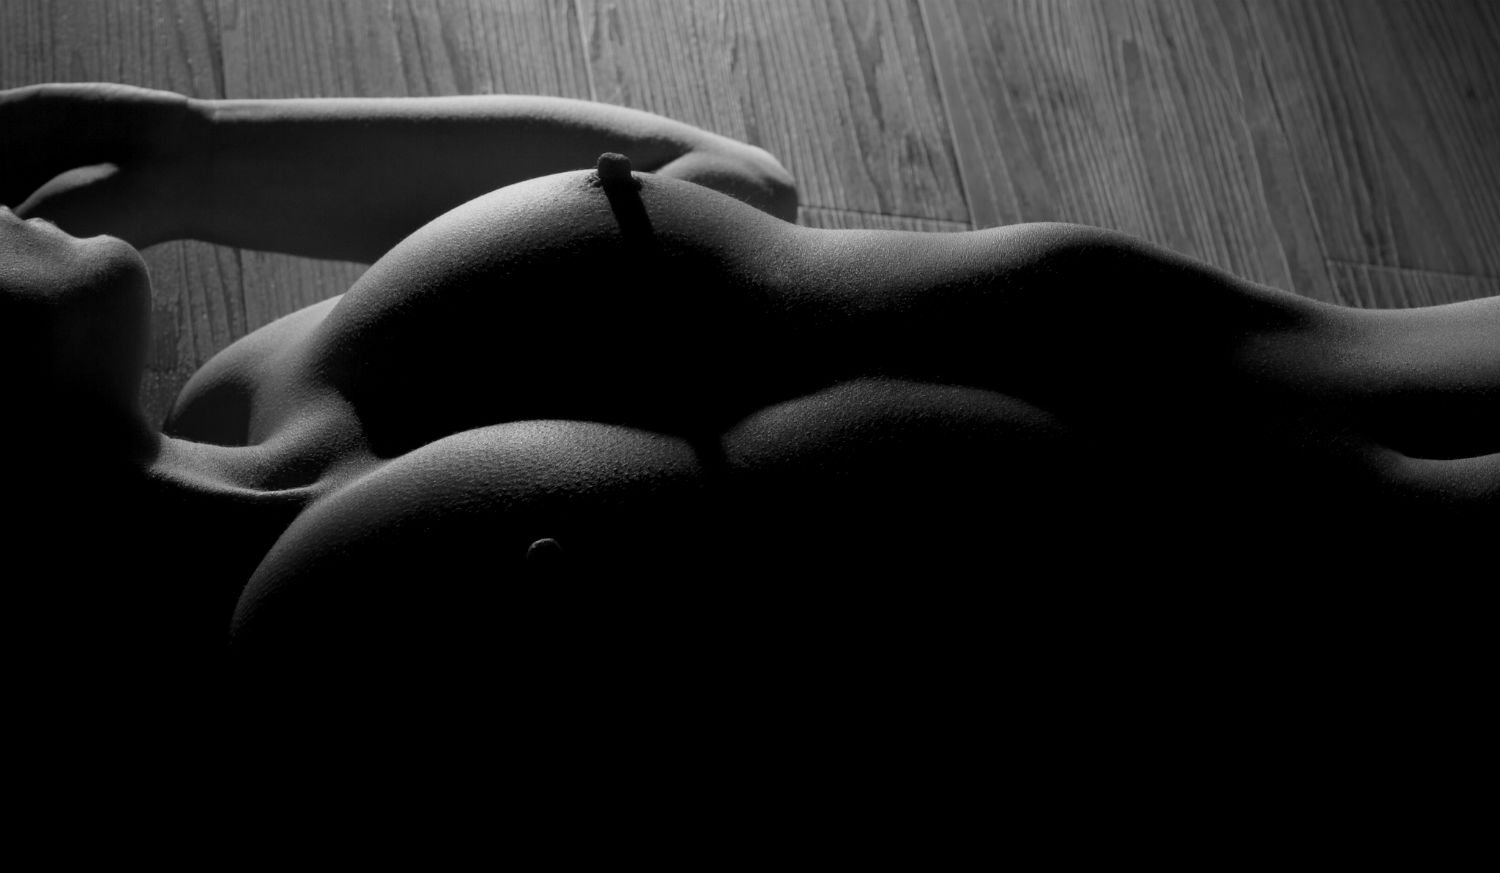 Black and white photography erotic